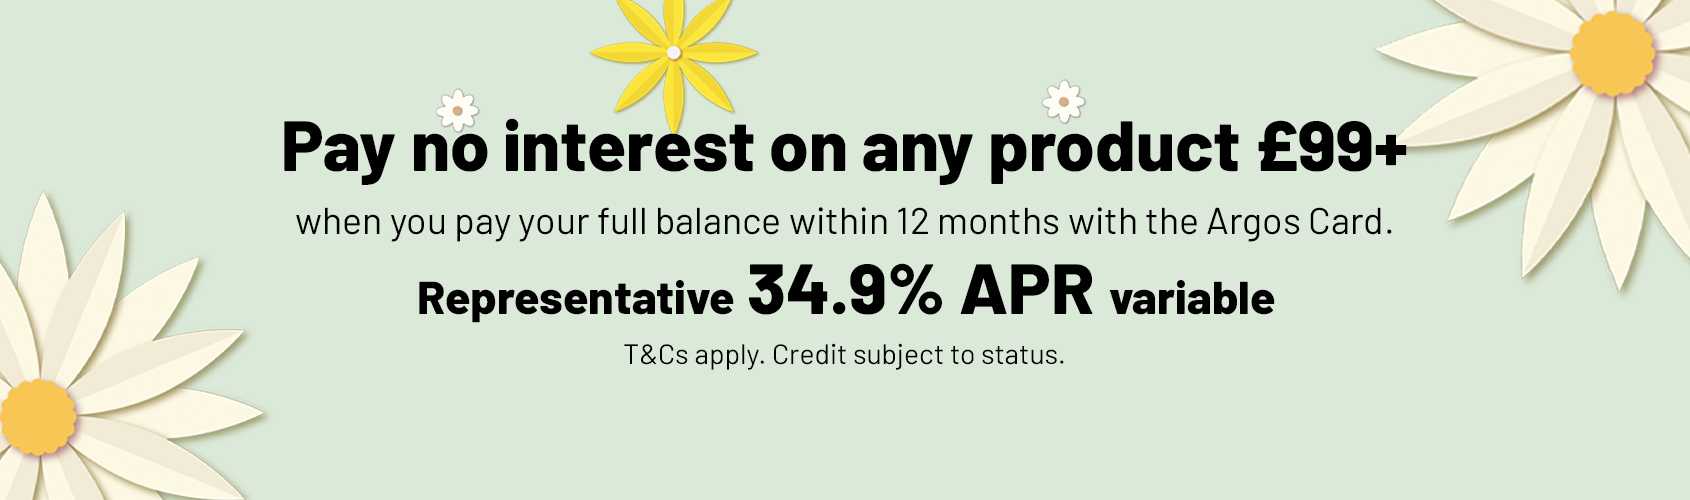 Pay no interest on any product £99+ when you pay your full balance within 12 months with the Argos card. Representative 34.9% APR variable. T&Cs apply. Credit subject to status.